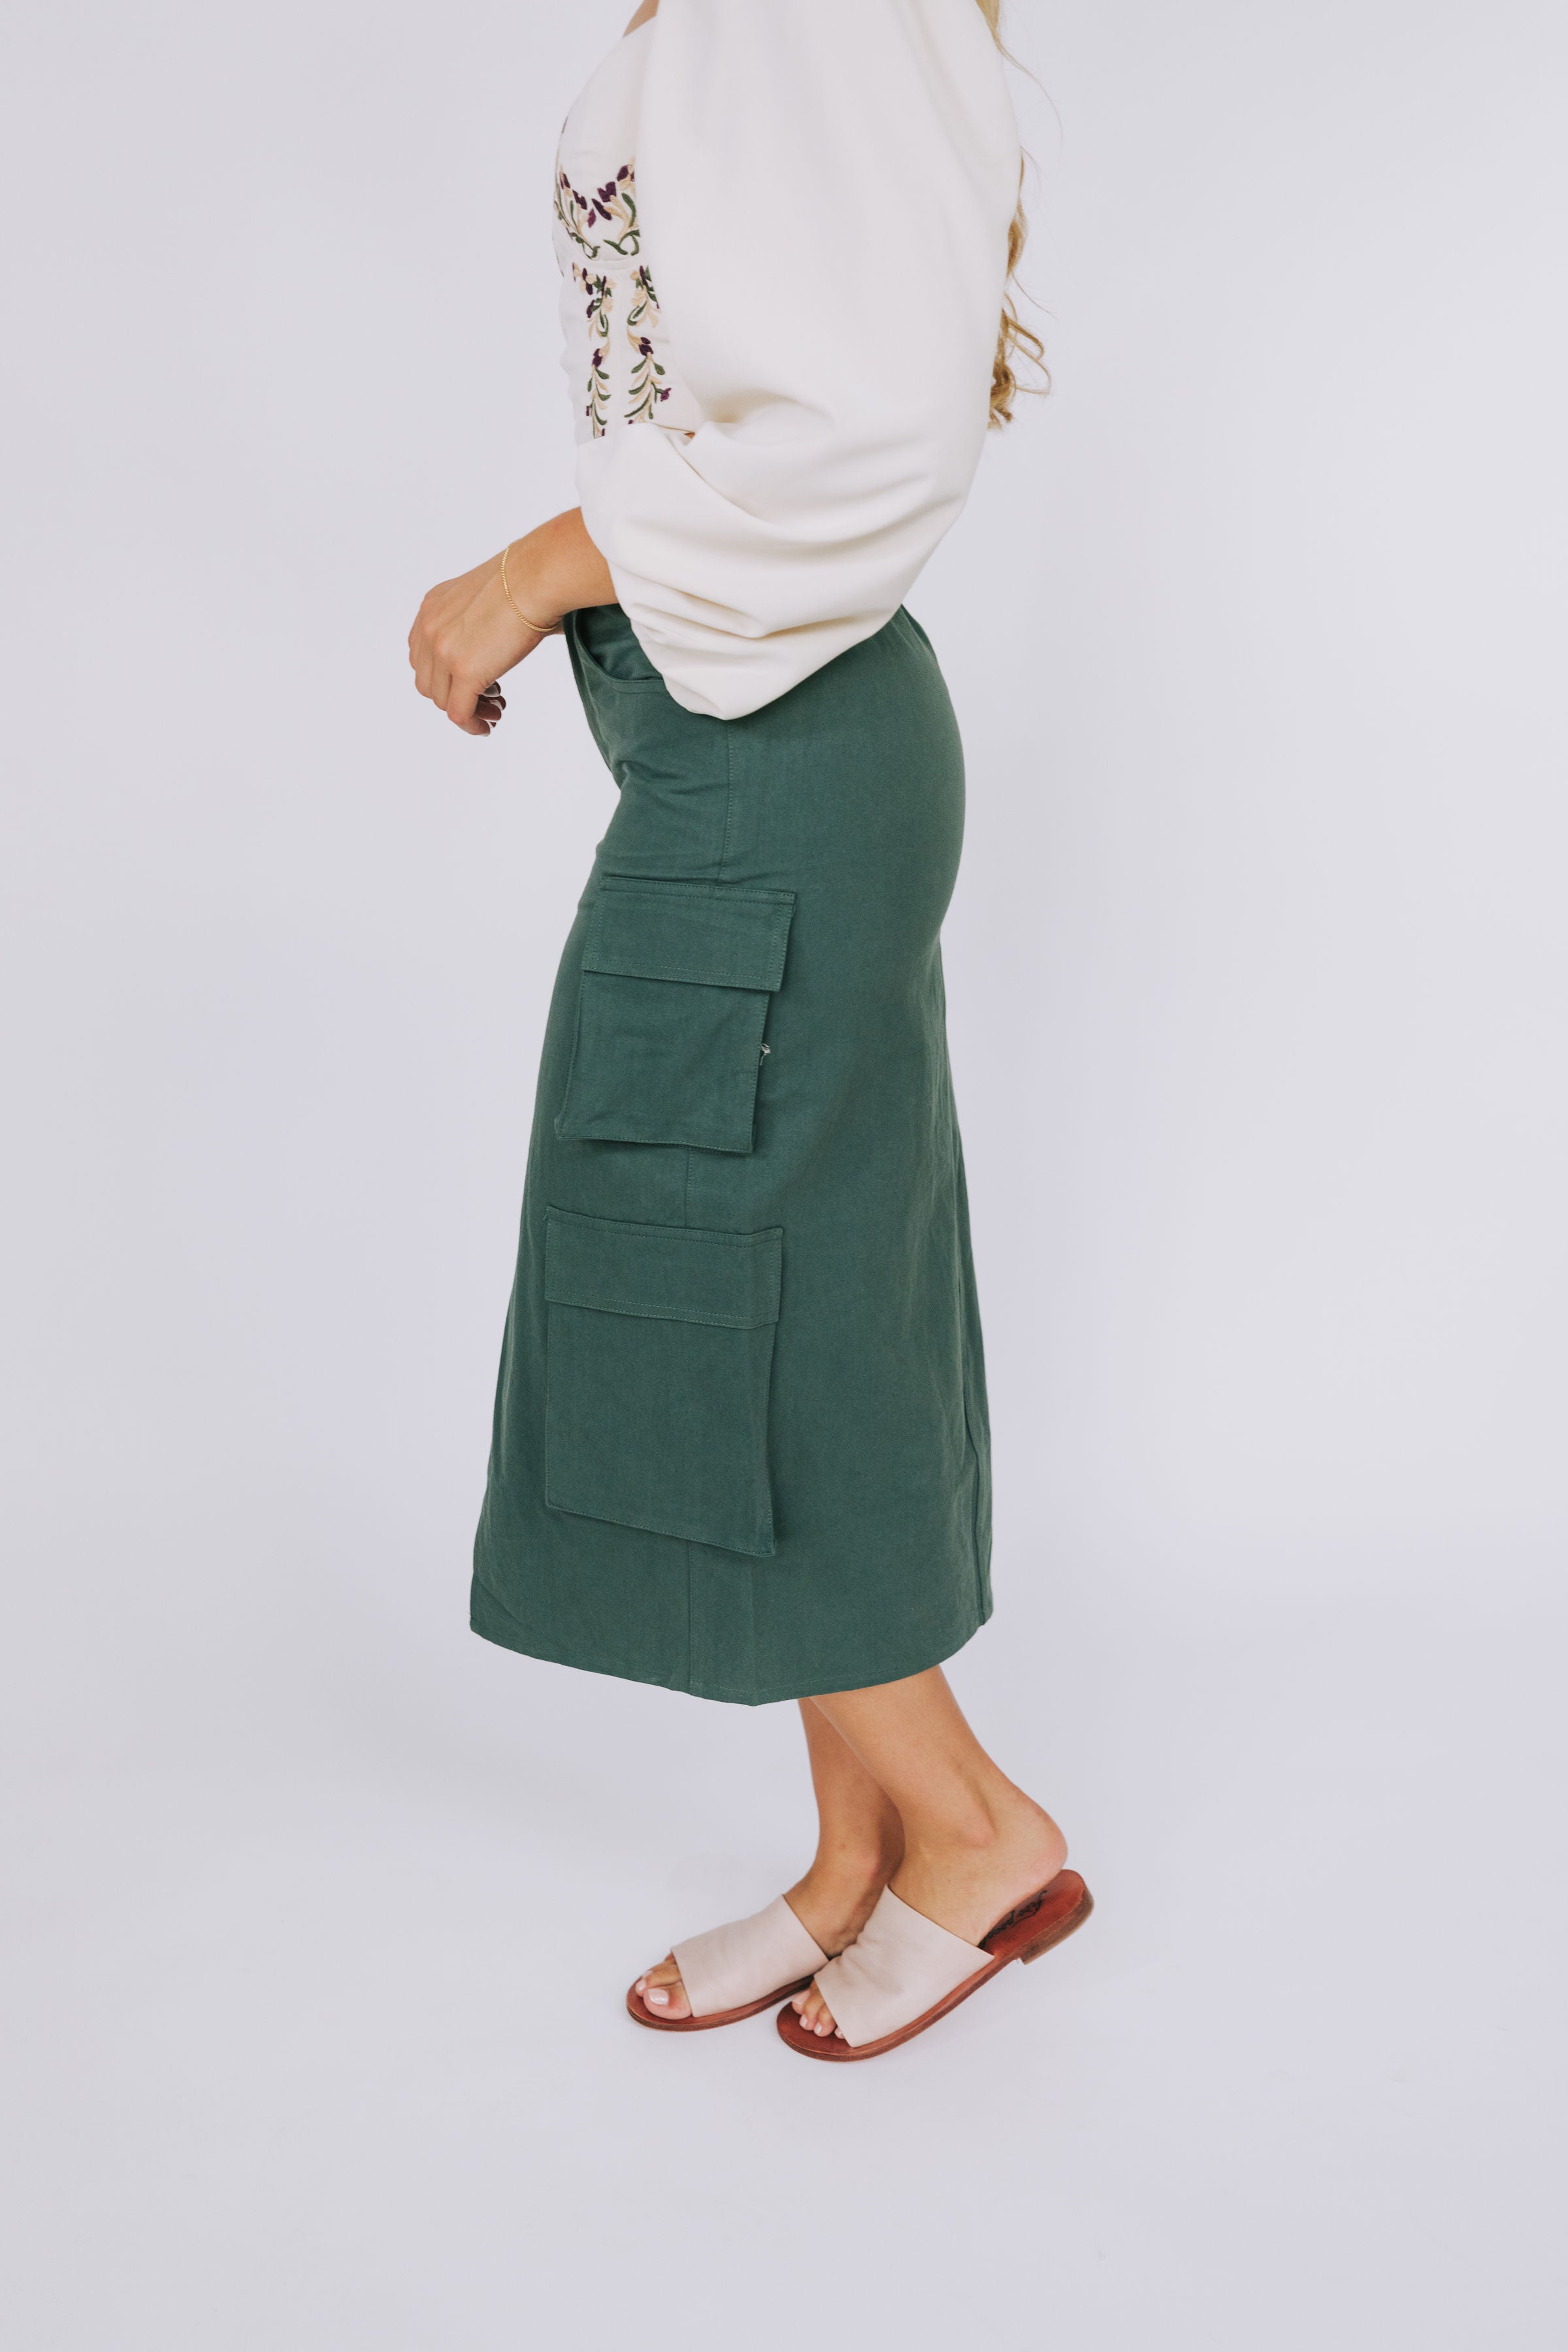 Stay Resilient Skirt